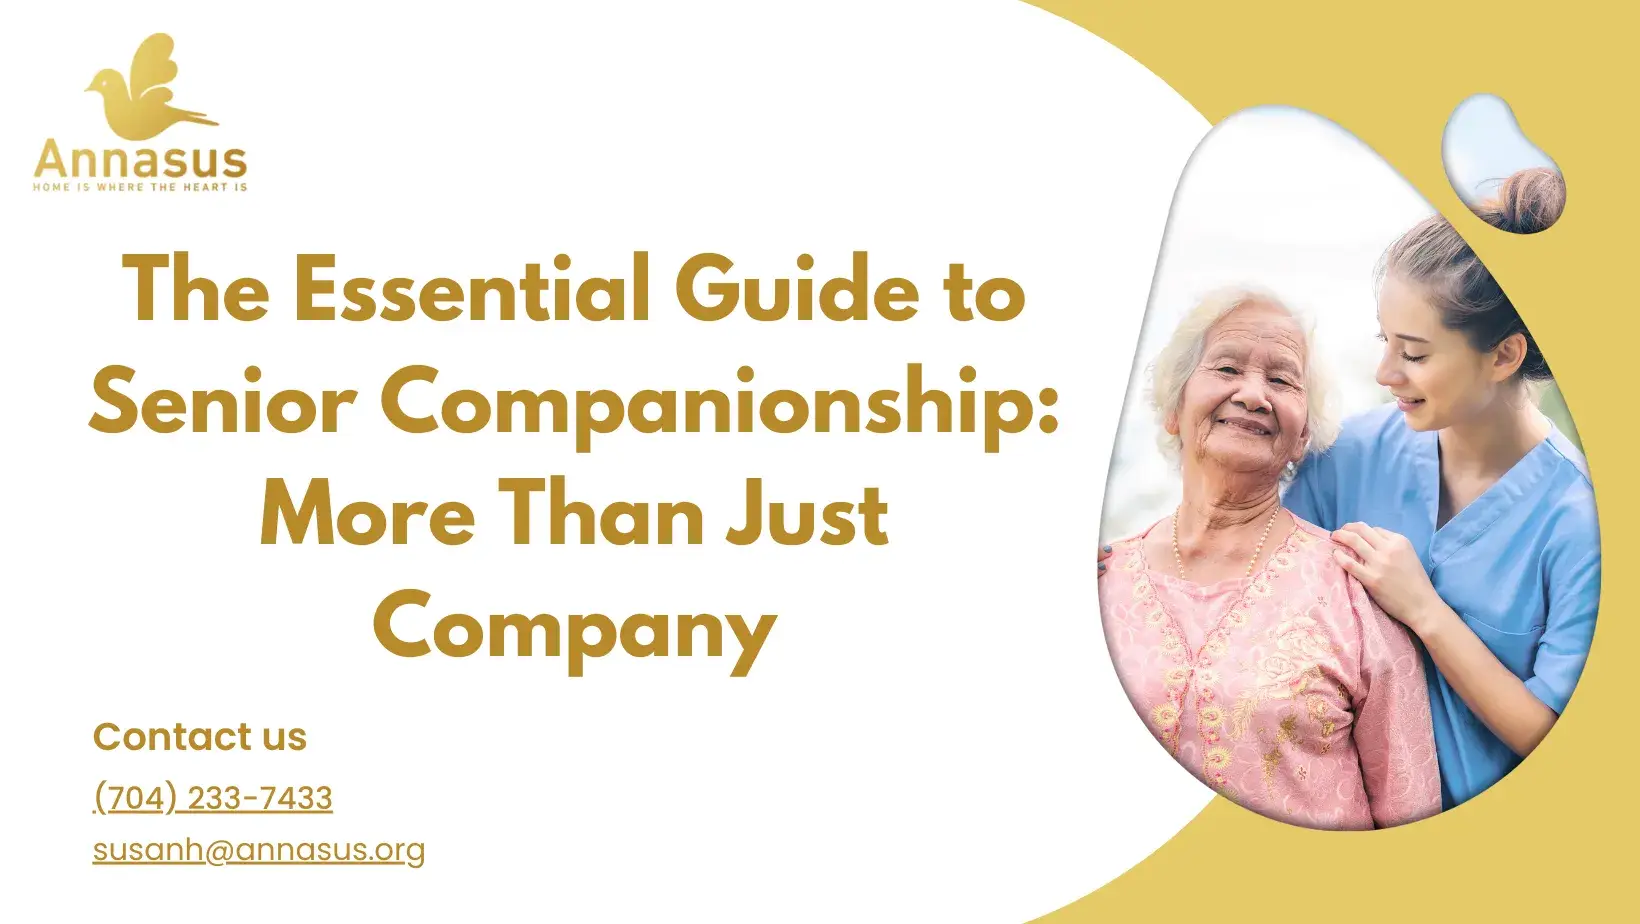 The Essential Guide to Senior Companionship: More Than Just Company